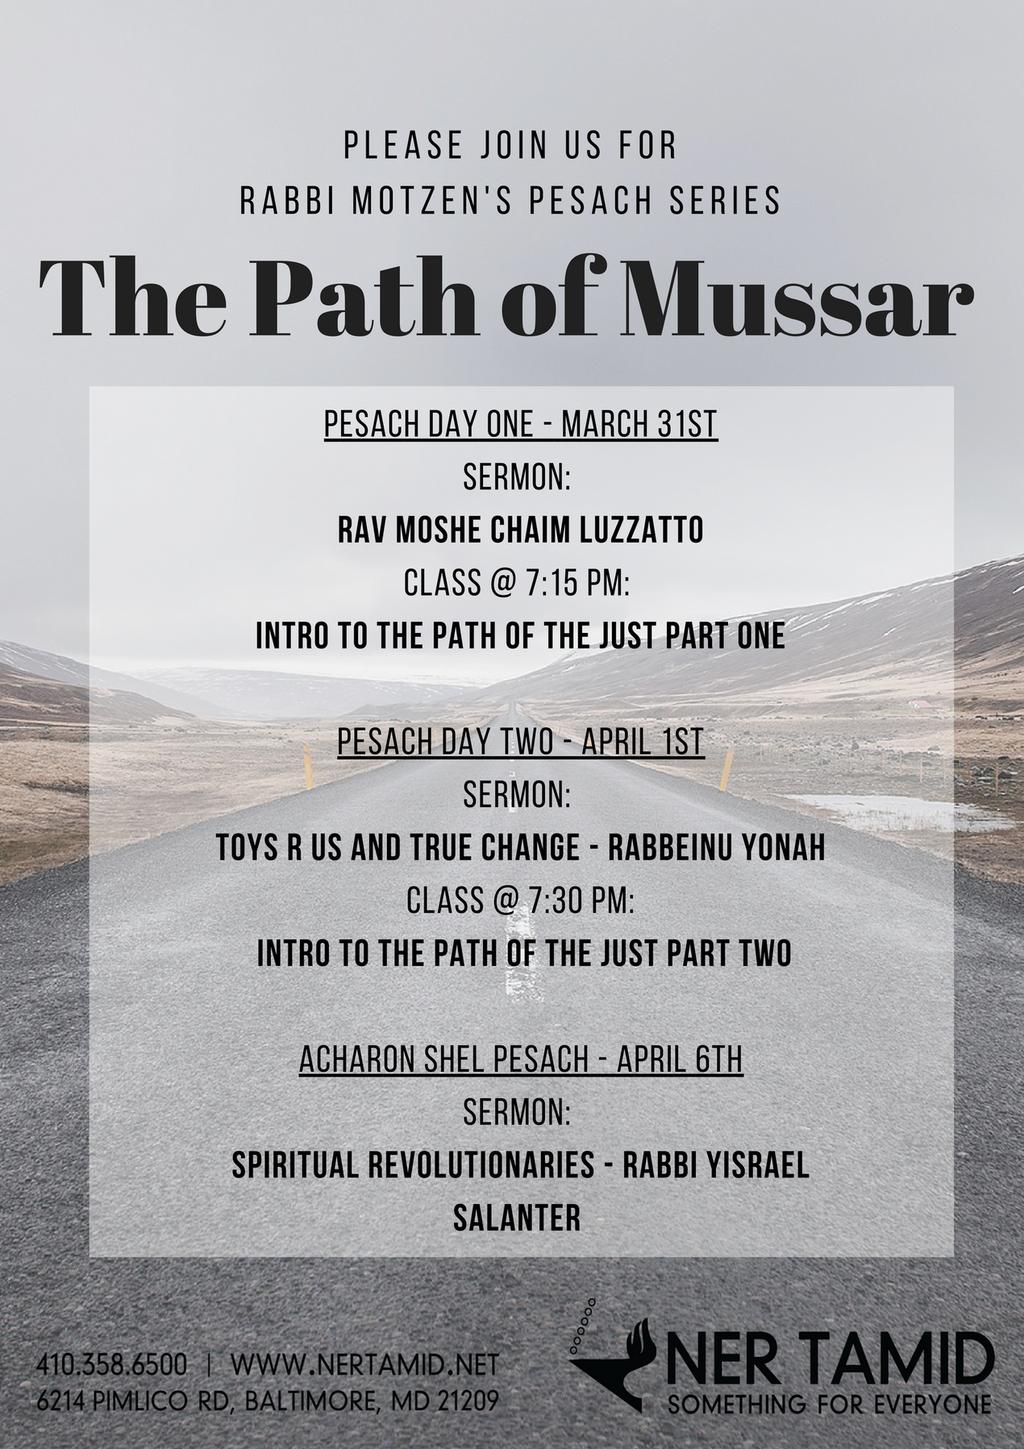 Events Continued America Eats for Israel Sunday, May 15 Ner Tamid will be supporting Meir Panim in Israel, by eating out, taking out and enjoying time with friends. Details to follow.